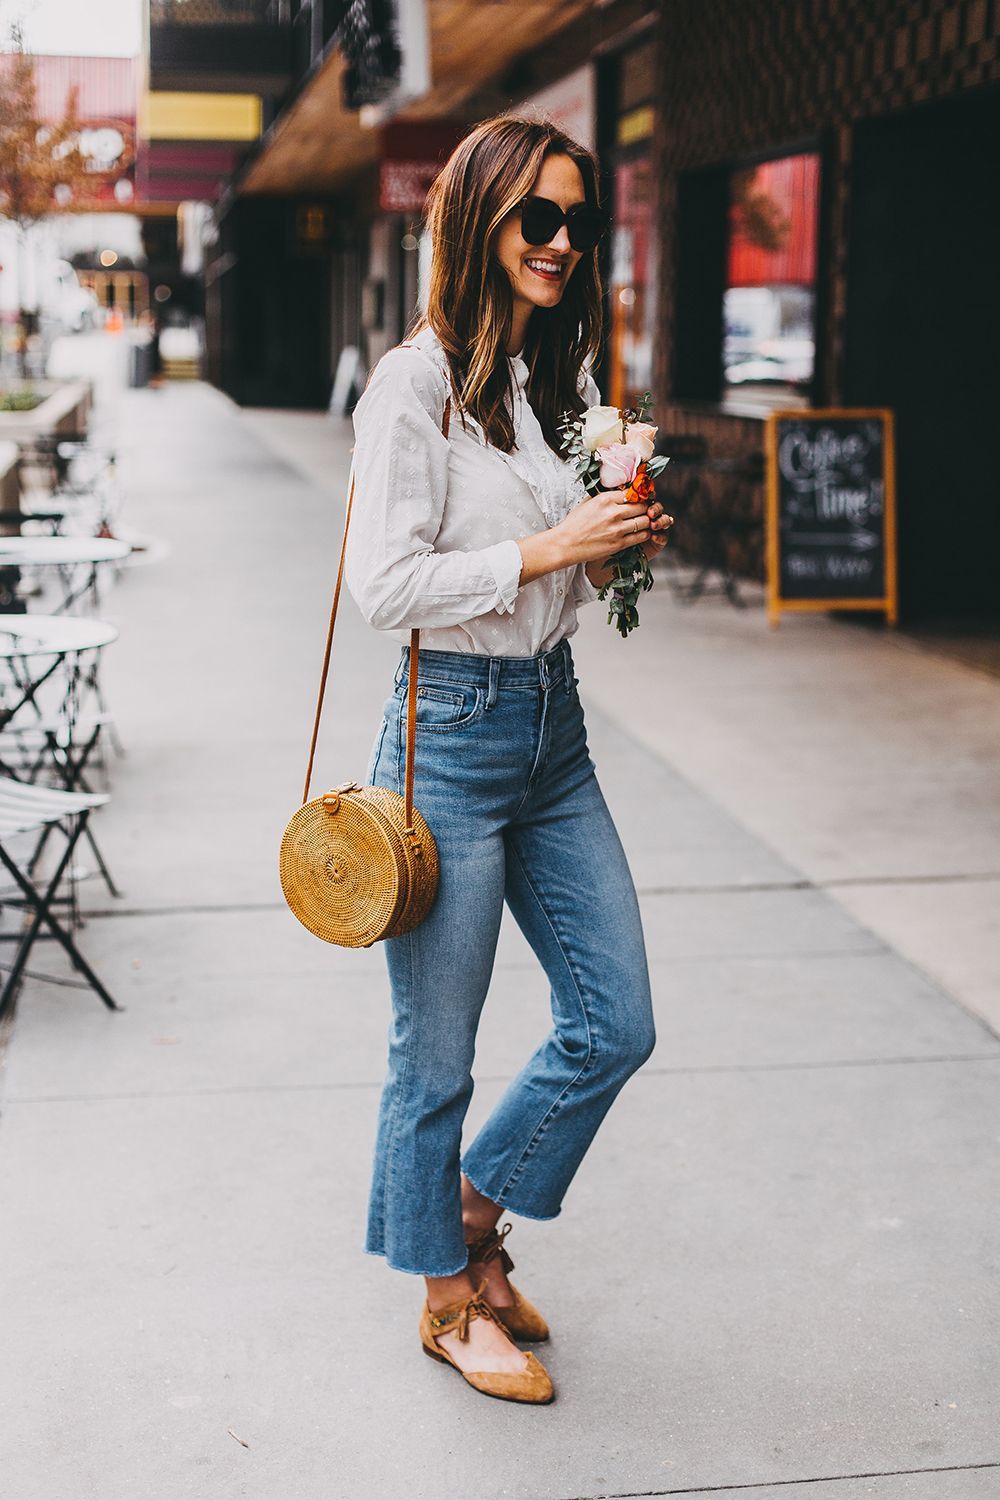 17 style Simple jeans ideas